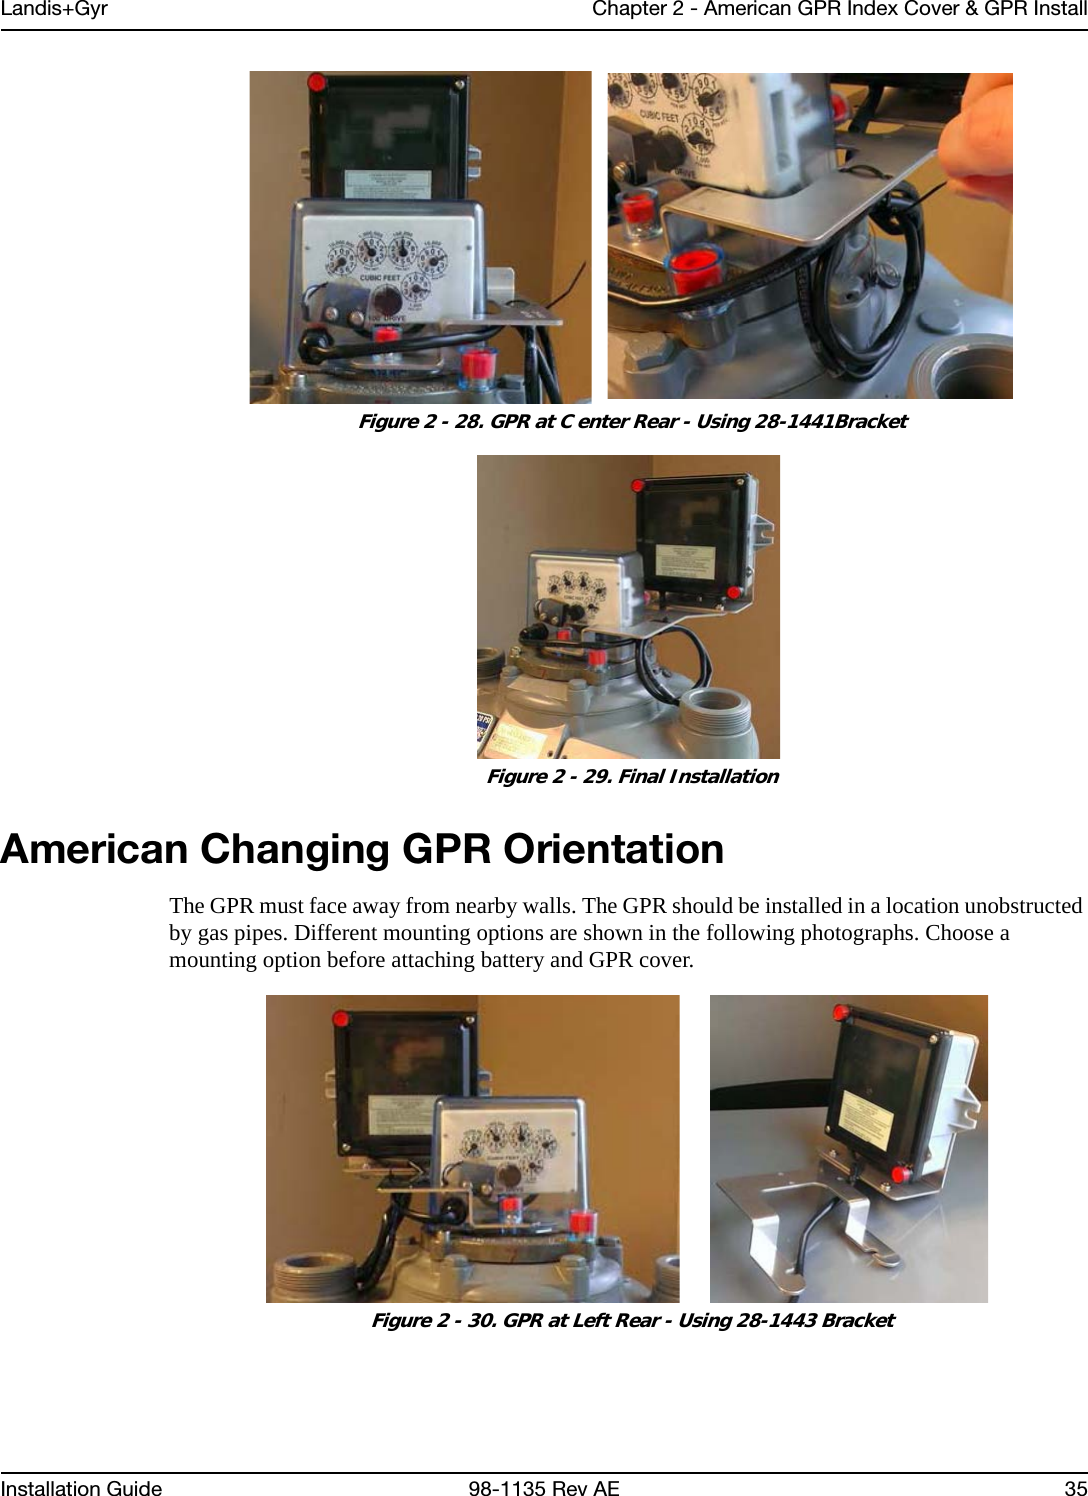 Landis+Gyr Chapter 2 - American GPR Index Cover &amp; GPR InstallInstallation Guide 98-1135 Rev AE 35 Figure 2 - 28. GPR at C enter Rear - Using 28-1441Bracket Figure 2 - 29. Final InstallationAmerican Changing GPR OrientationThe GPR must face away from nearby walls. The GPR should be installed in a location unobstructed by gas pipes. Different mounting options are shown in the following photographs. Choose a mounting option before attaching battery and GPR cover. Figure 2 - 30. GPR at Left Rear - Using 28-1443 Bracket